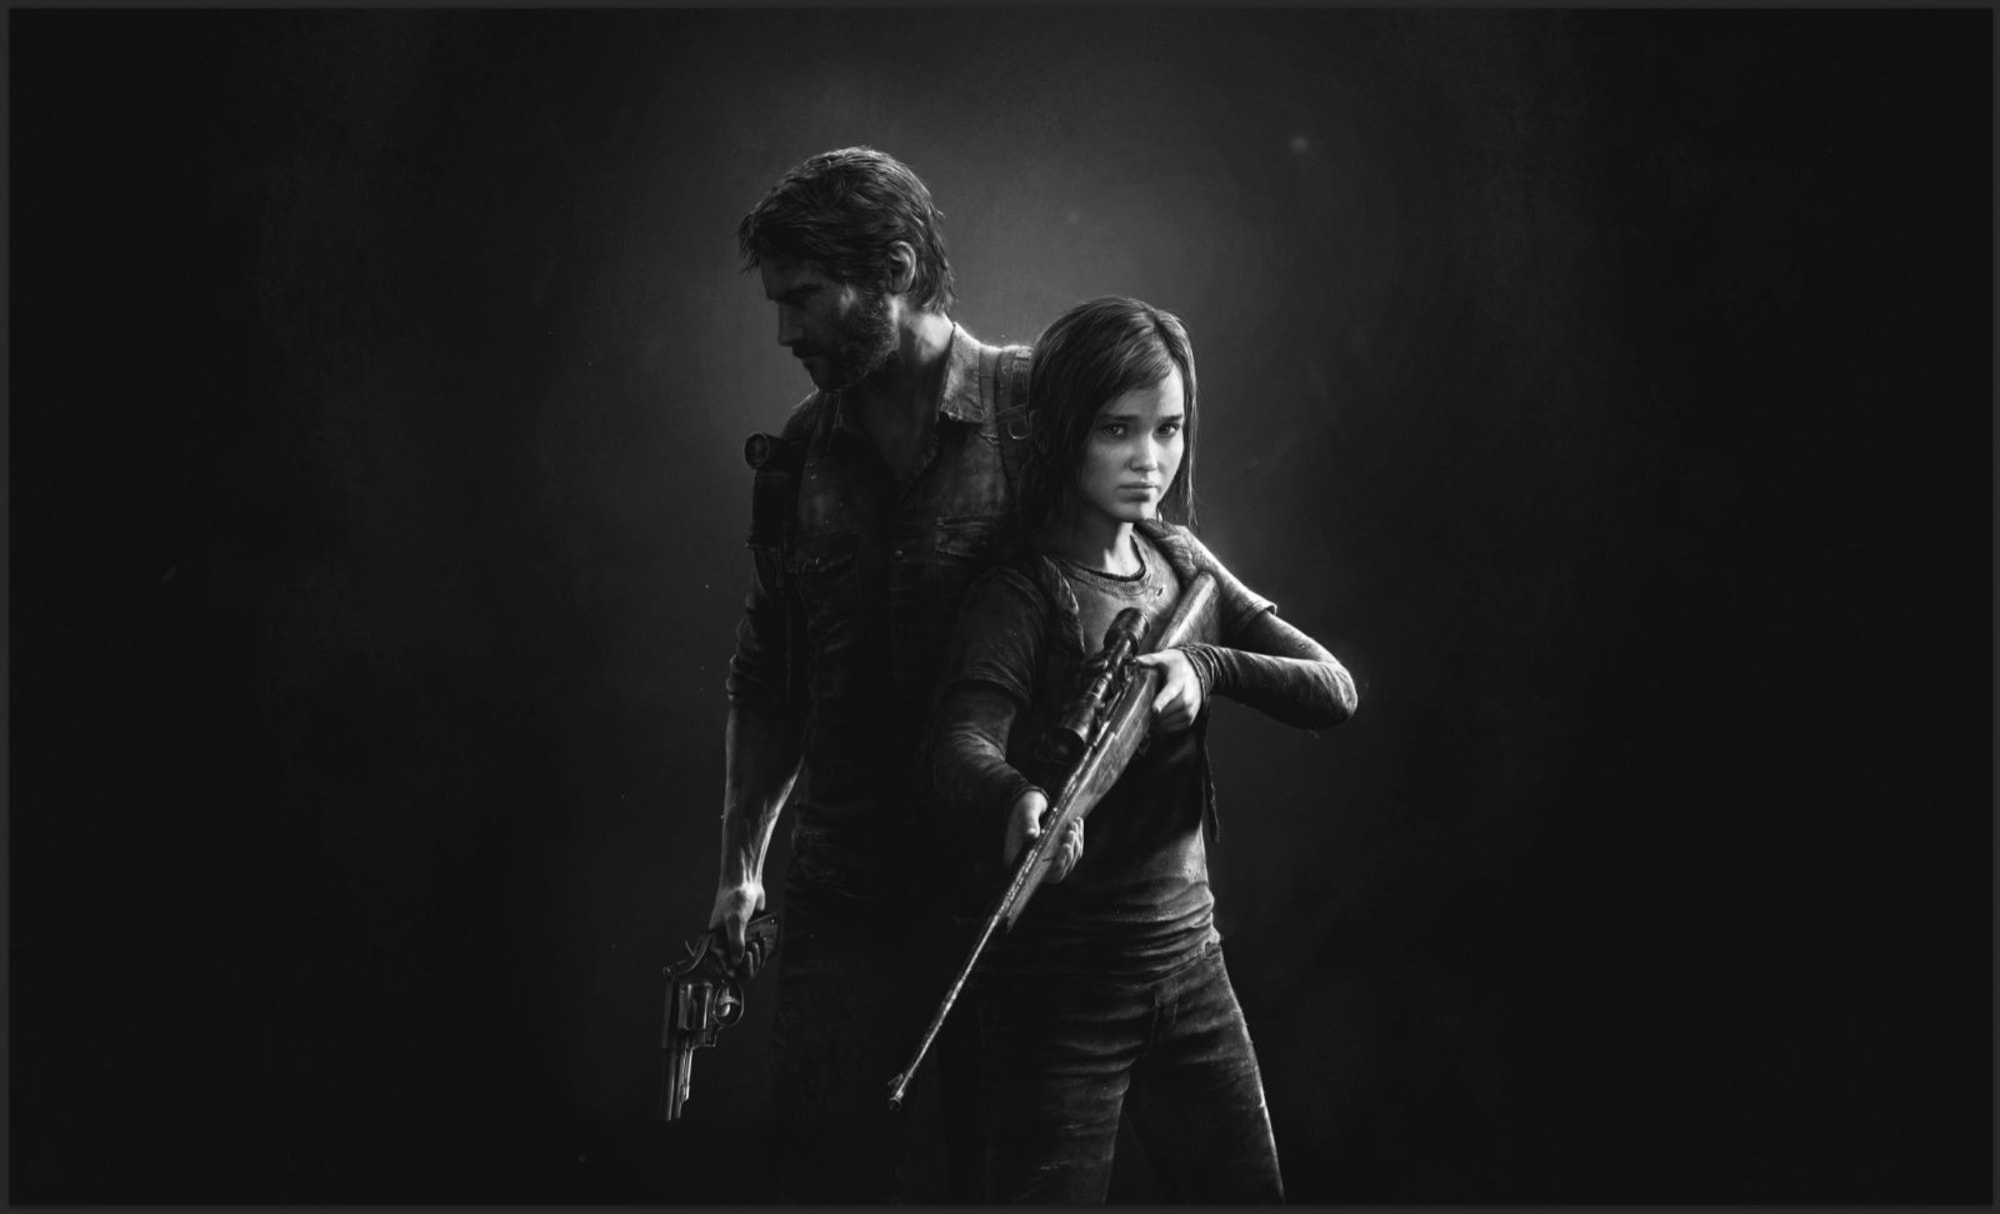 The Last of Us' Season 2: What to expect based on the games